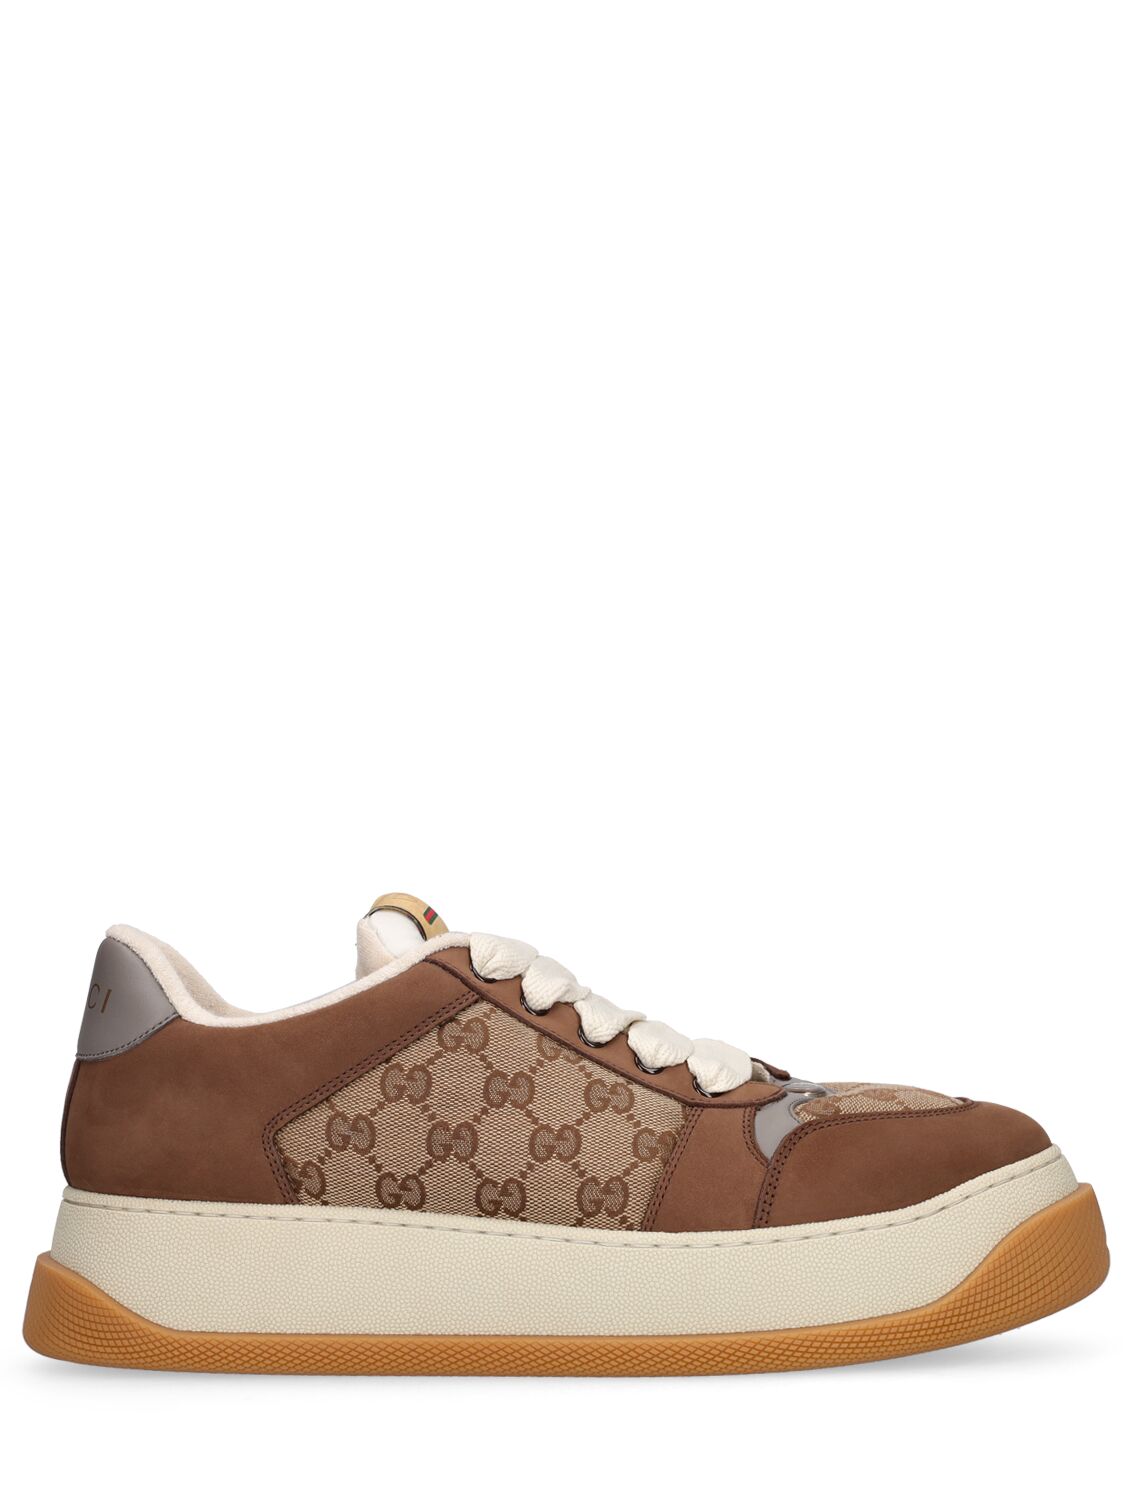 Image of Double Screener Cotton Blend Sneakers